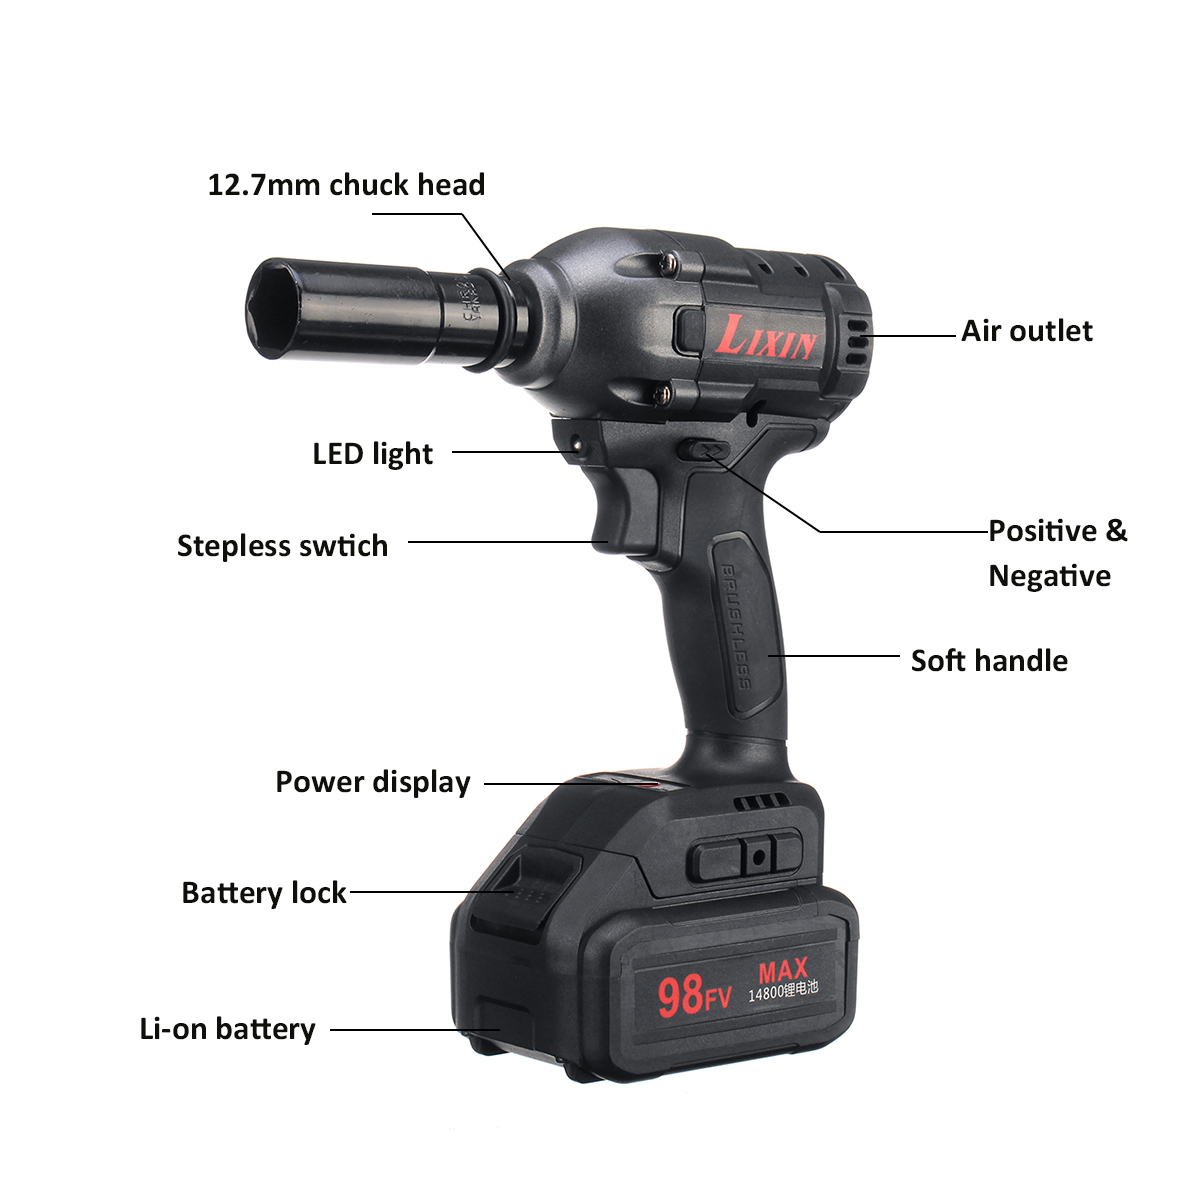 98FV 14800mAh Cordless Brushless Electric Wrench Drill LED Light W/ 1 or 2 Li-on Battery 18